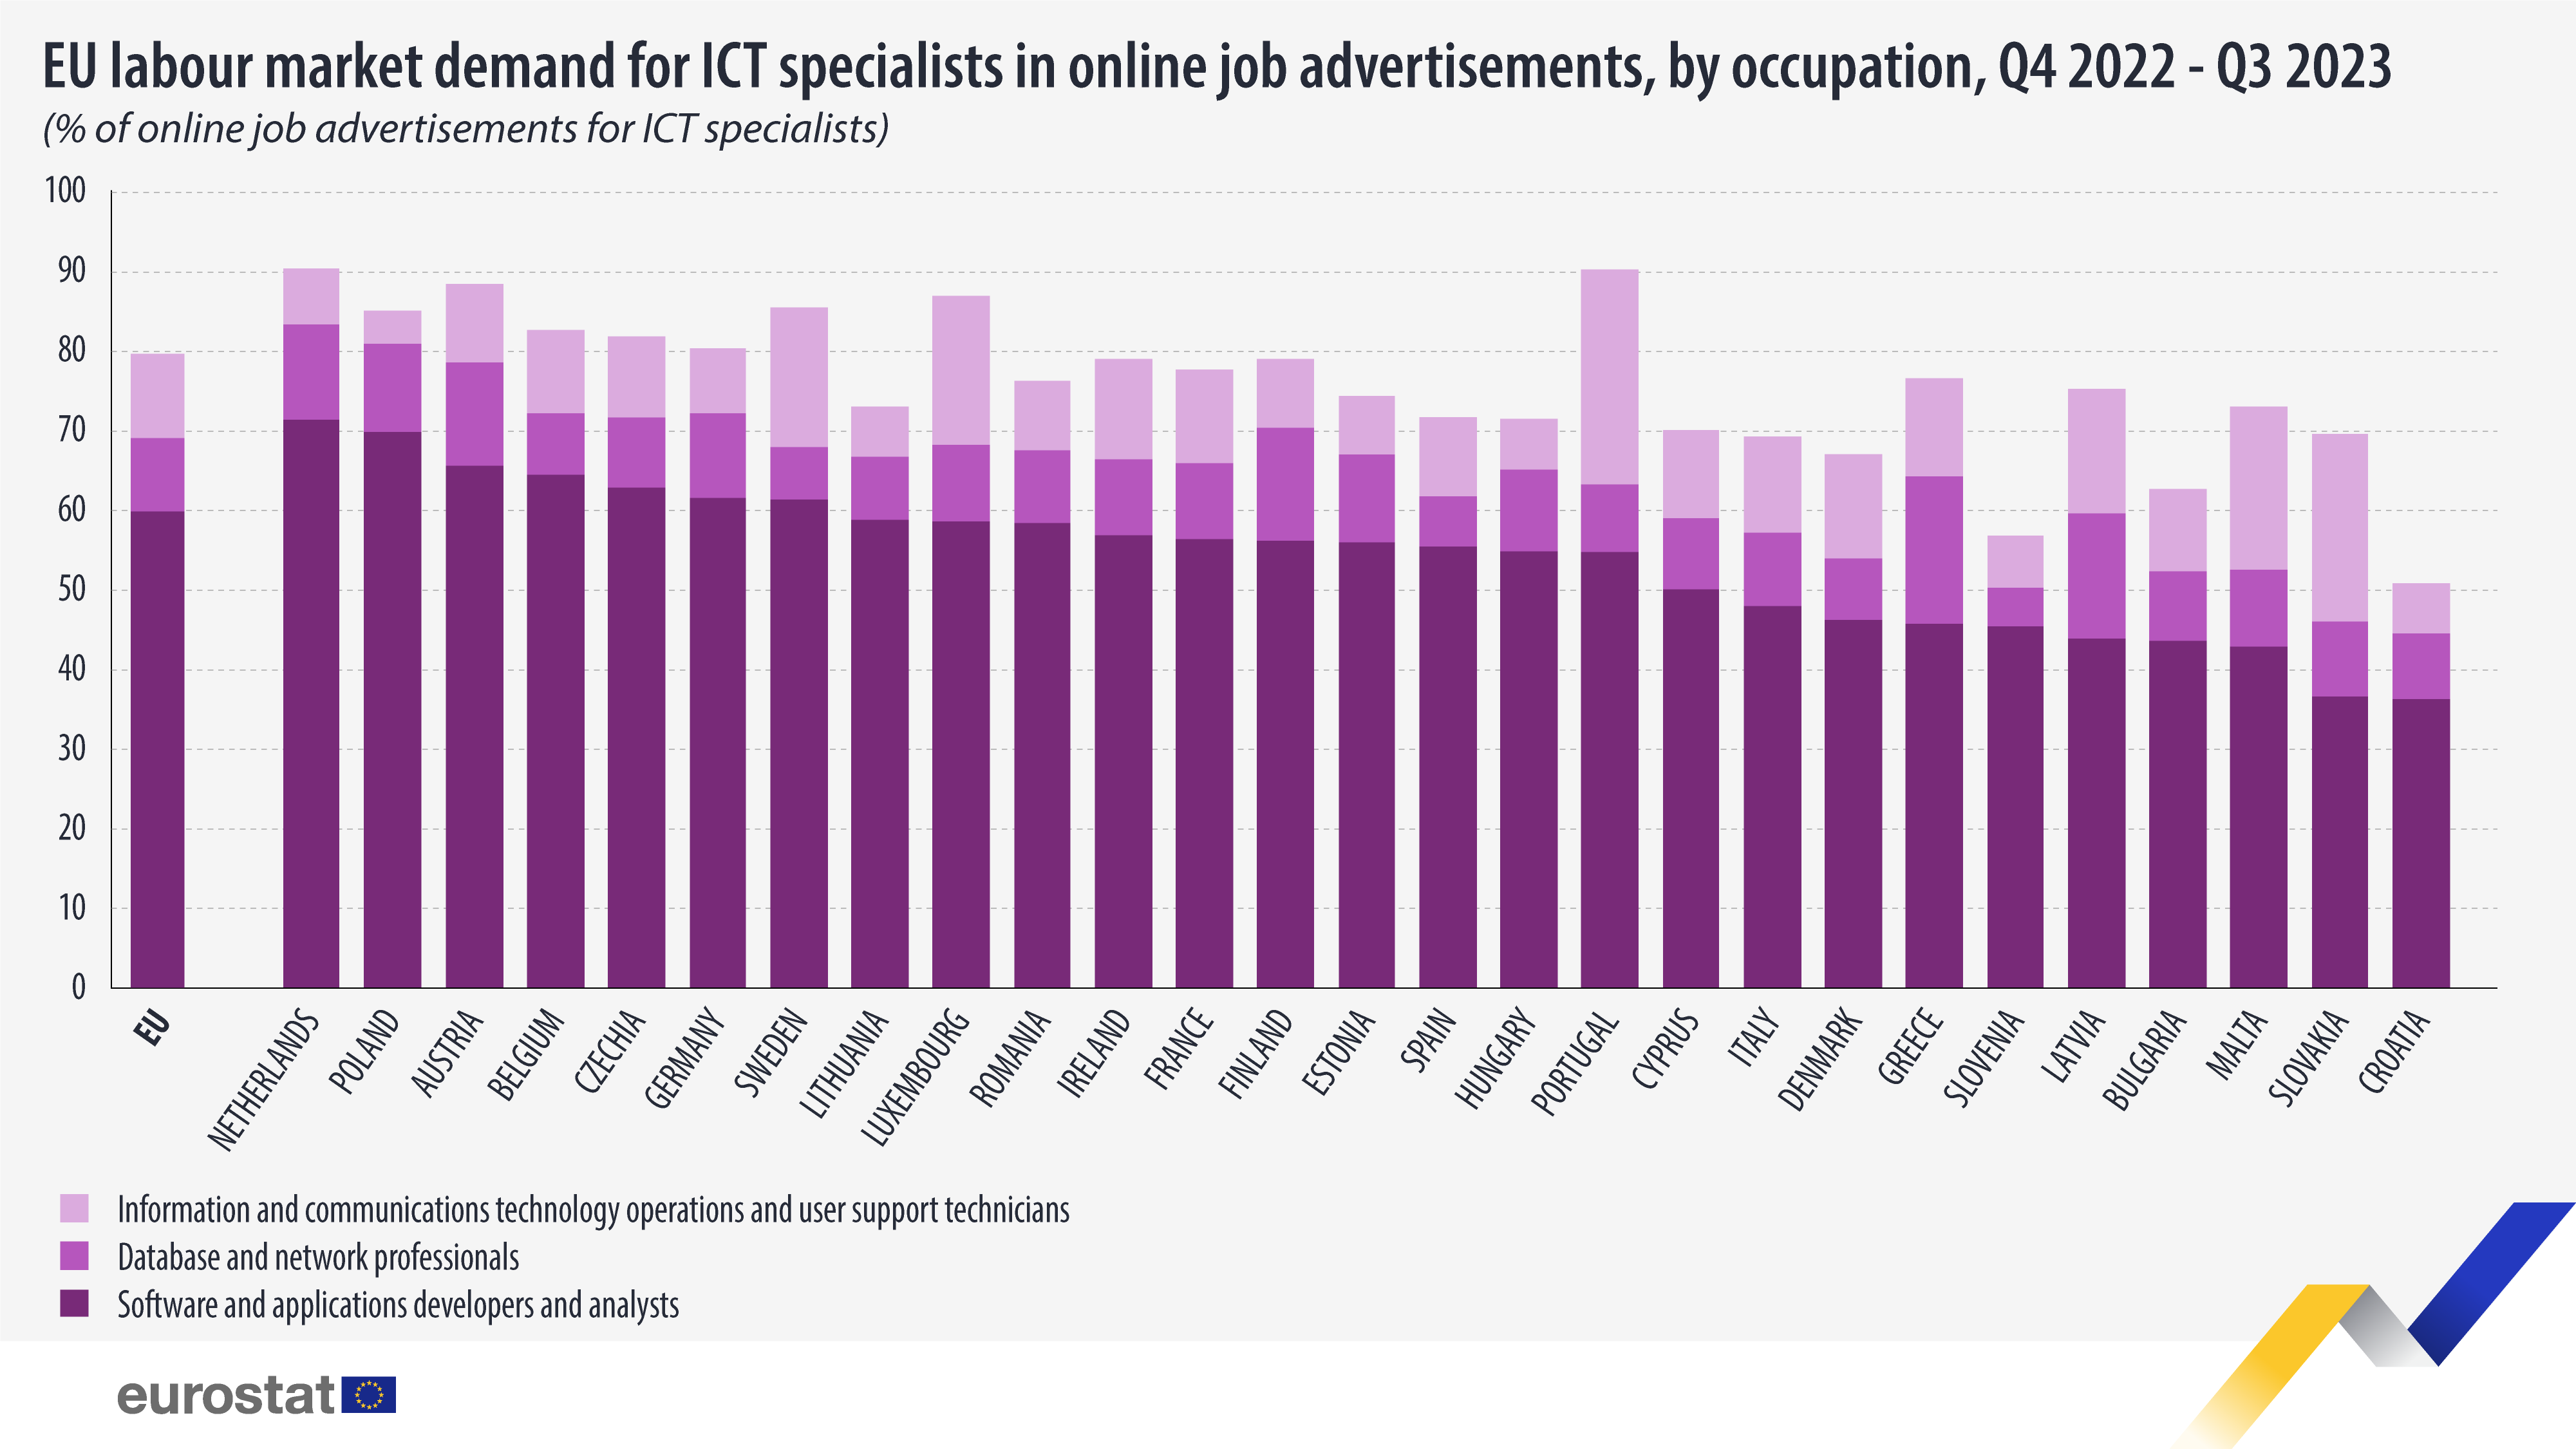 Bar chart: EU labour market demand for ICT specialists in online job advertisements, by occupation, % of online job advertisements for ICT specialists, Q4 2022-Q3 2023